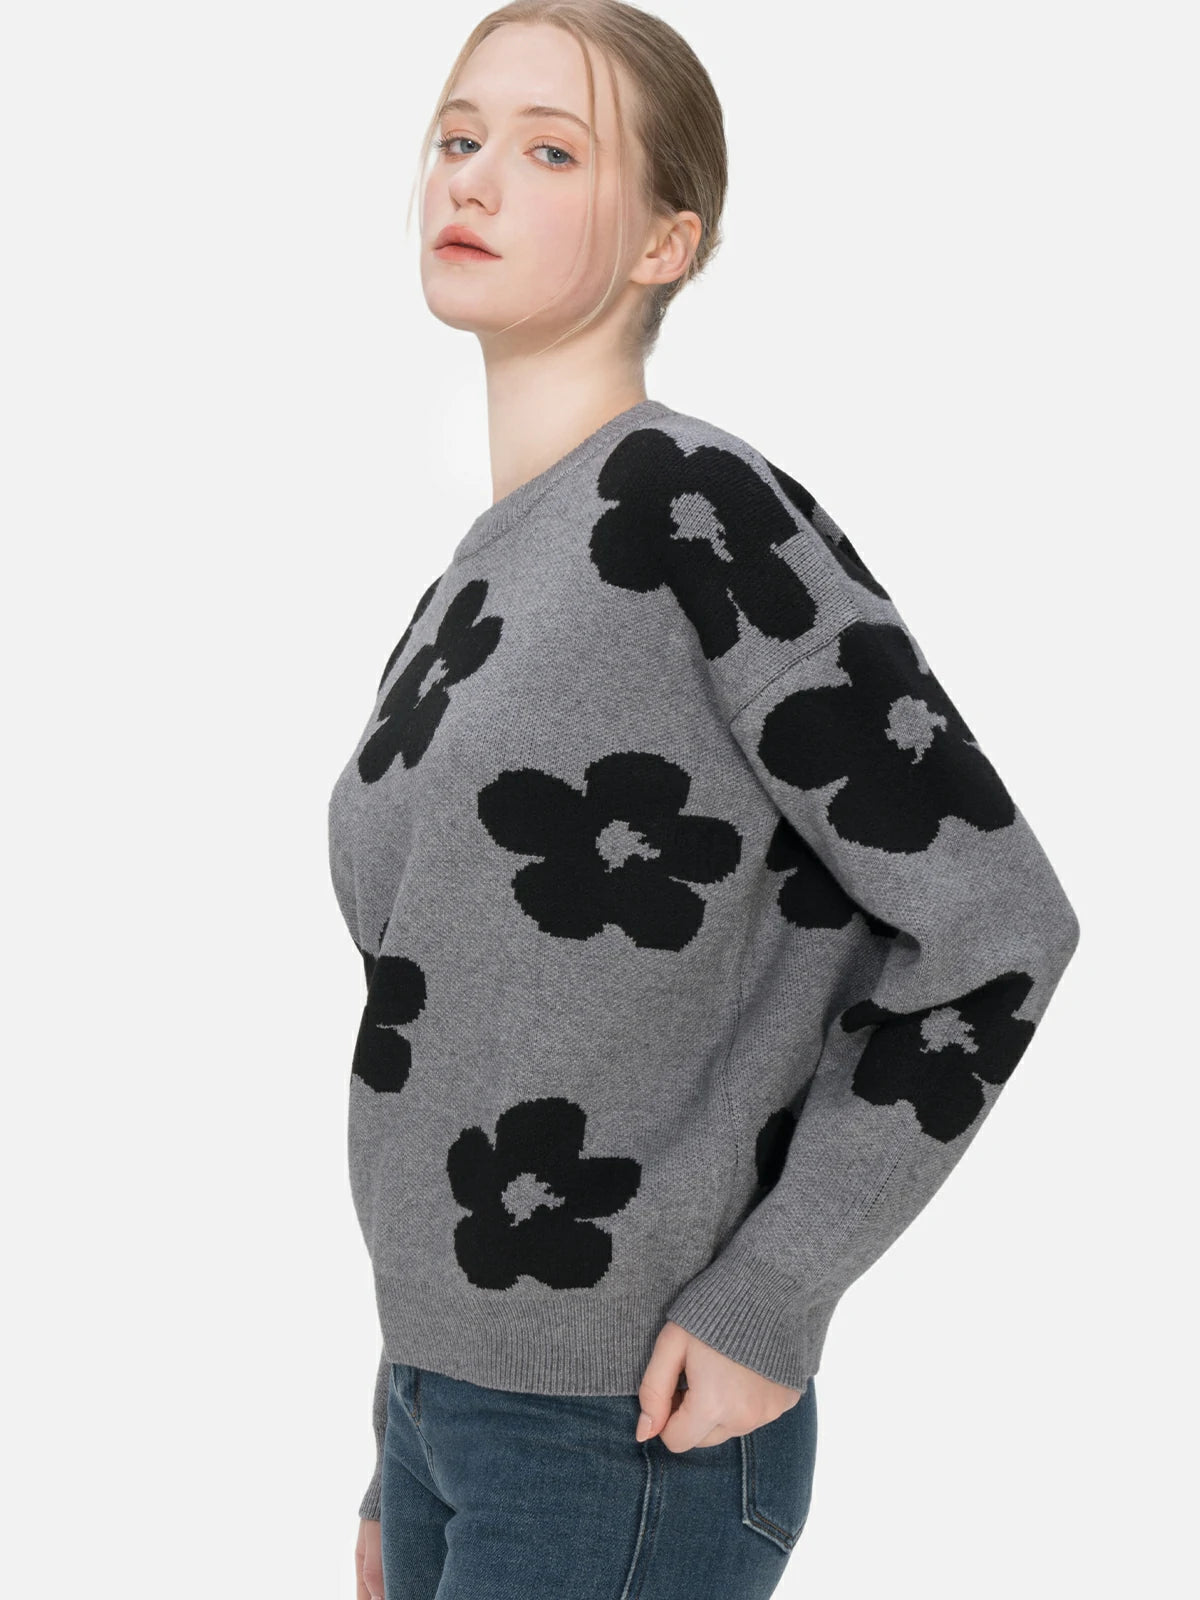 Casual and comfortable gray sweater featuring a loose-fit design and charming floral print